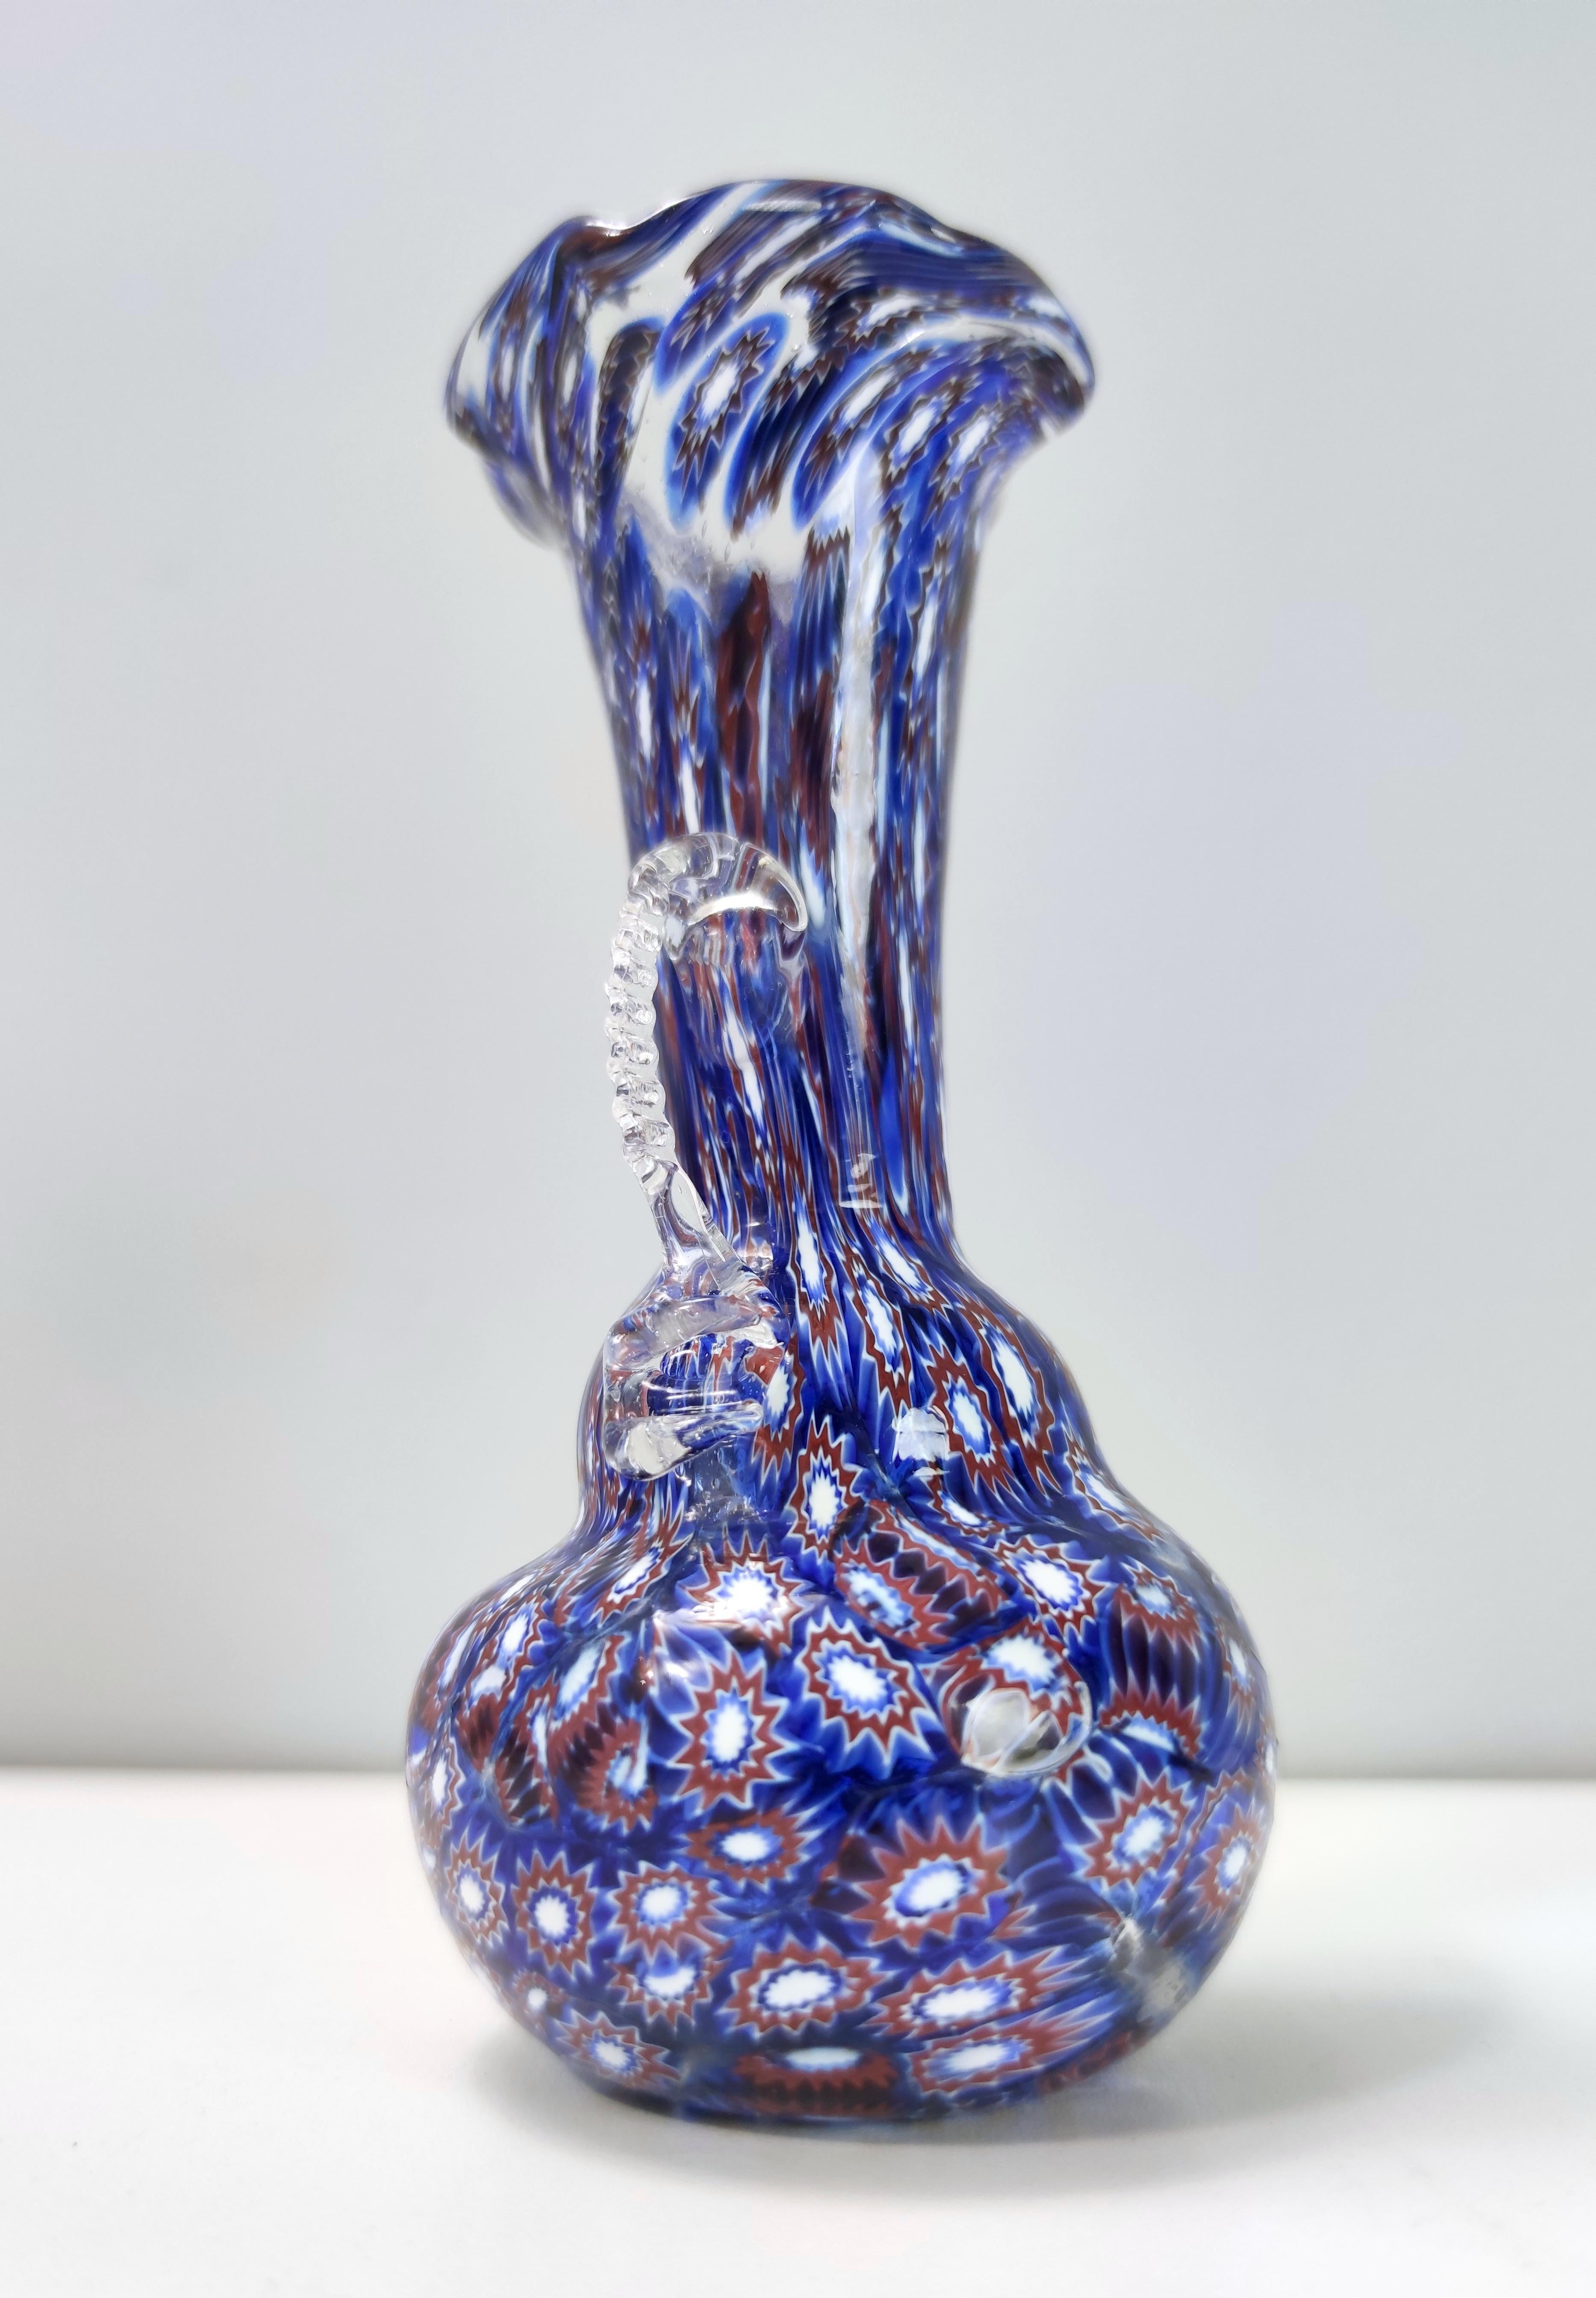 Vintage Blue Murano Glass Vase Ascribable to Fratelli Toso with Murrines, Italy For Sale 3